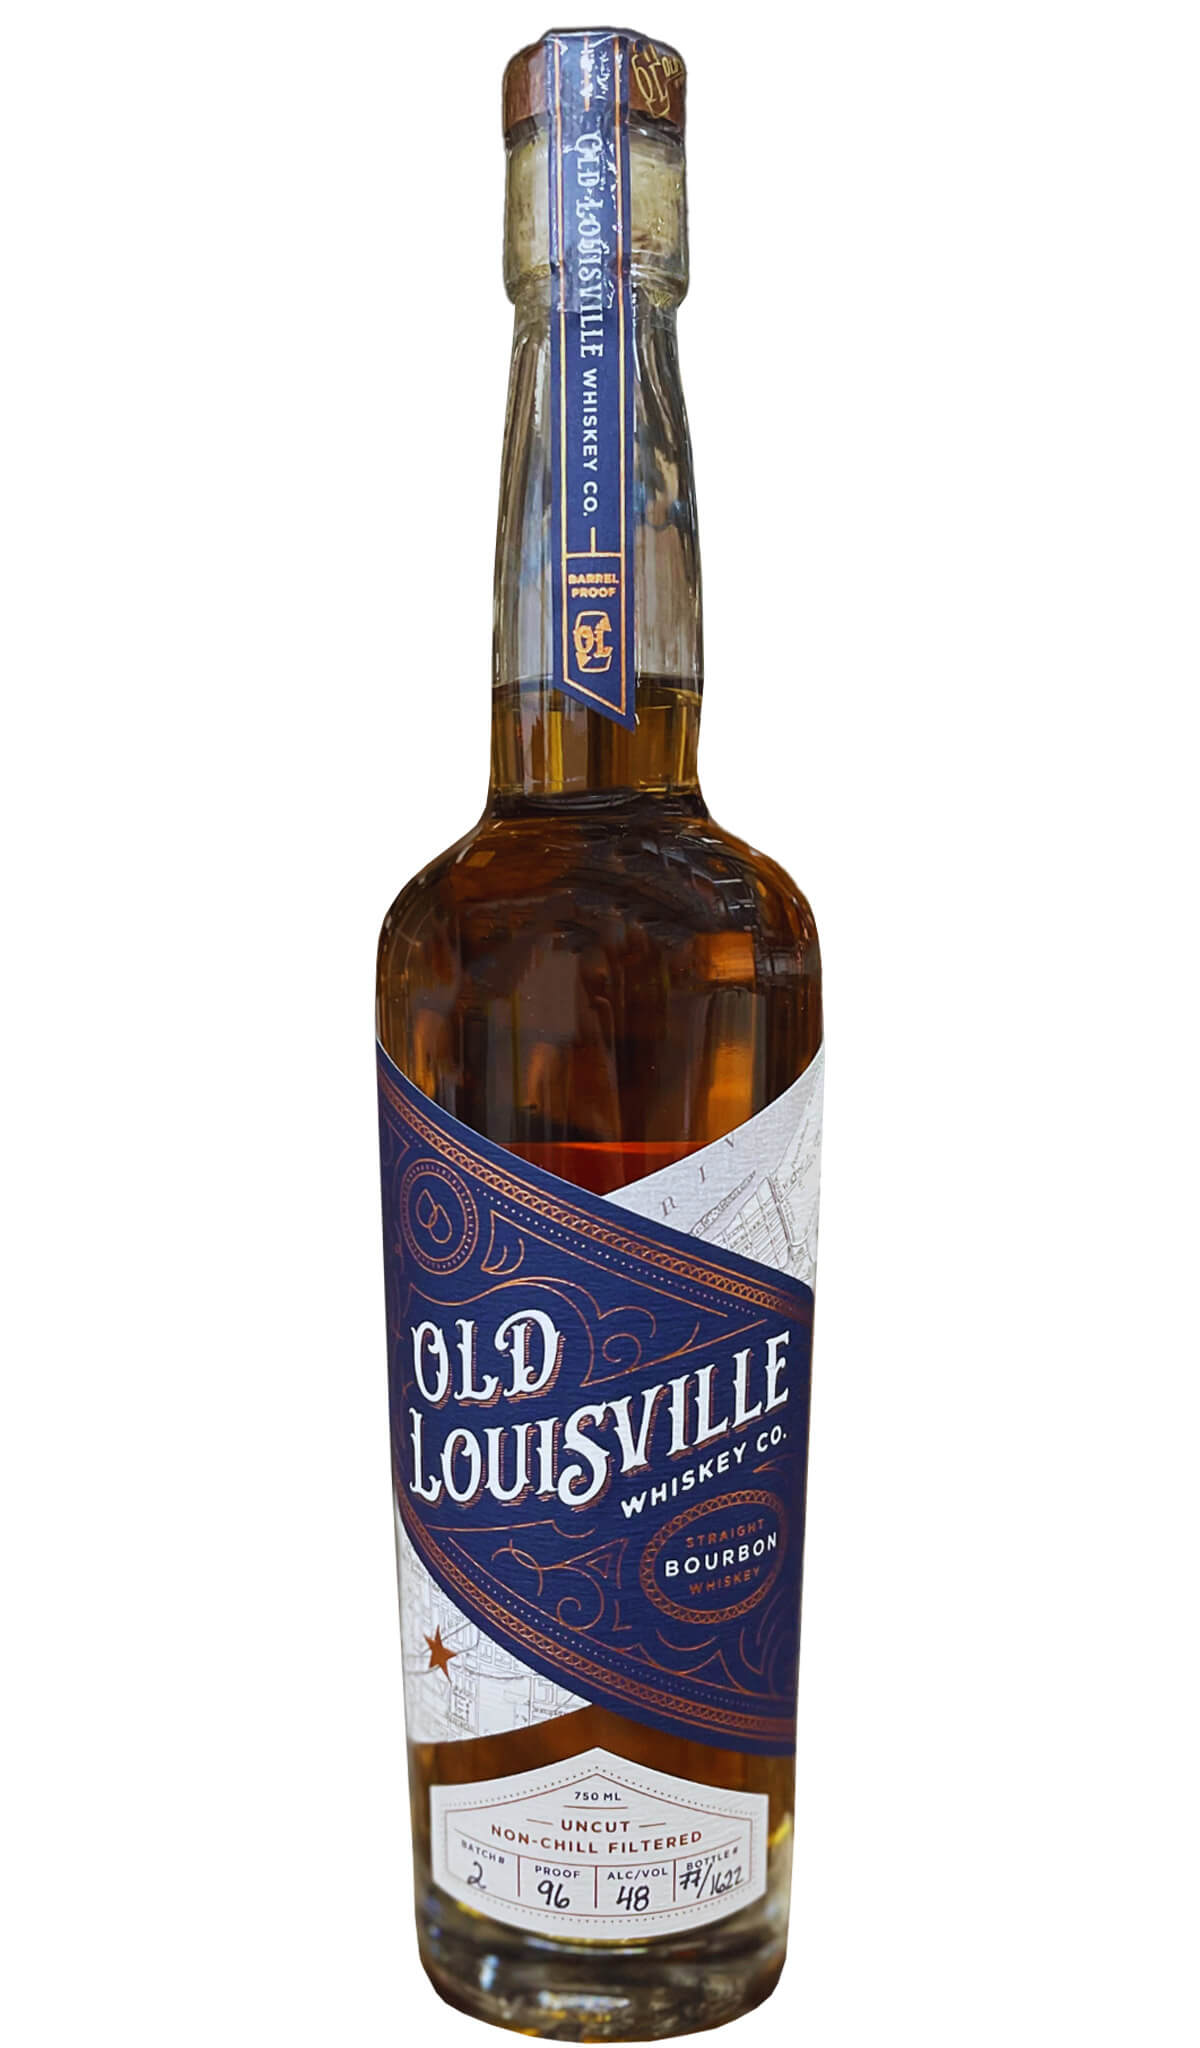 Find out more, explore the range and buy Old Louisville Whiskey Co. Bourbon Batch 2 750mL available online at Wine Sellers Direct - Australia's independent liquor specialists.